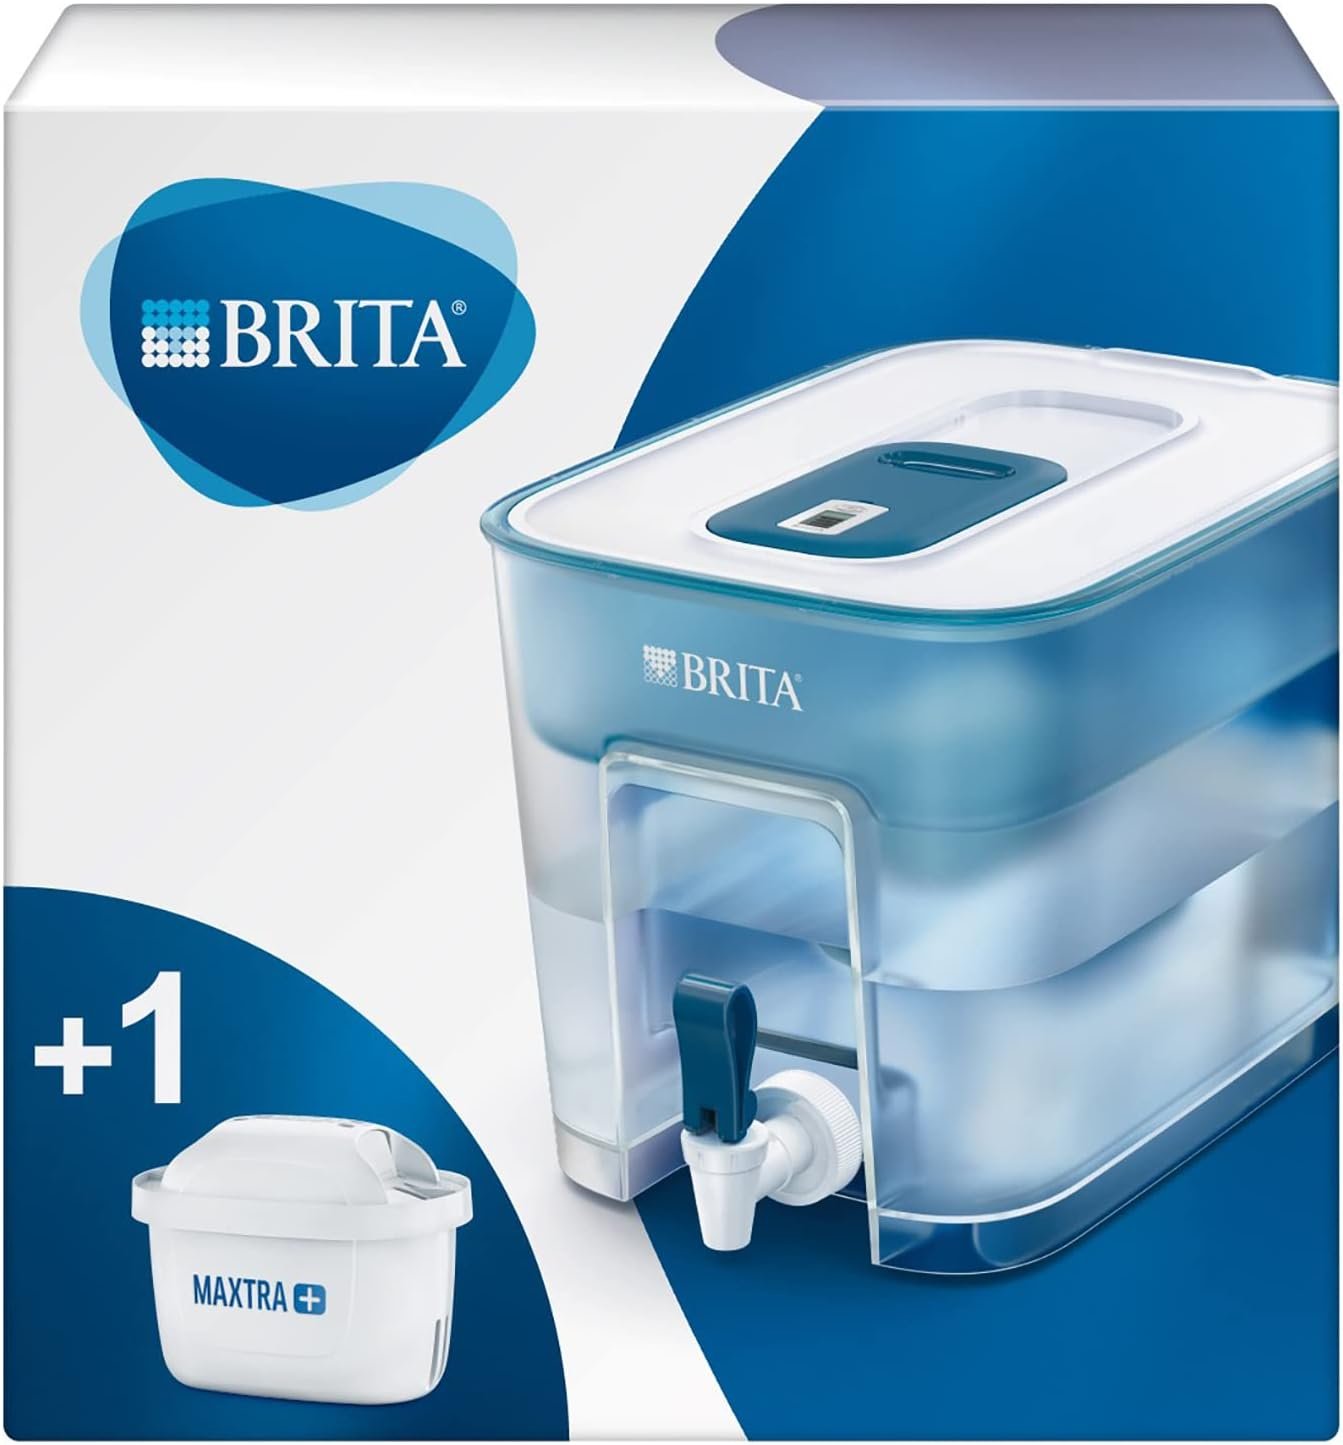 BRITA MAXTRA PRO All-in-1 Water Filter Cartridge 4 Pack (NEW) - Original  BRITA refill reducing impurities, chlorine, pesticides and limescale for  tap water with better taste : Home & Kitchen 